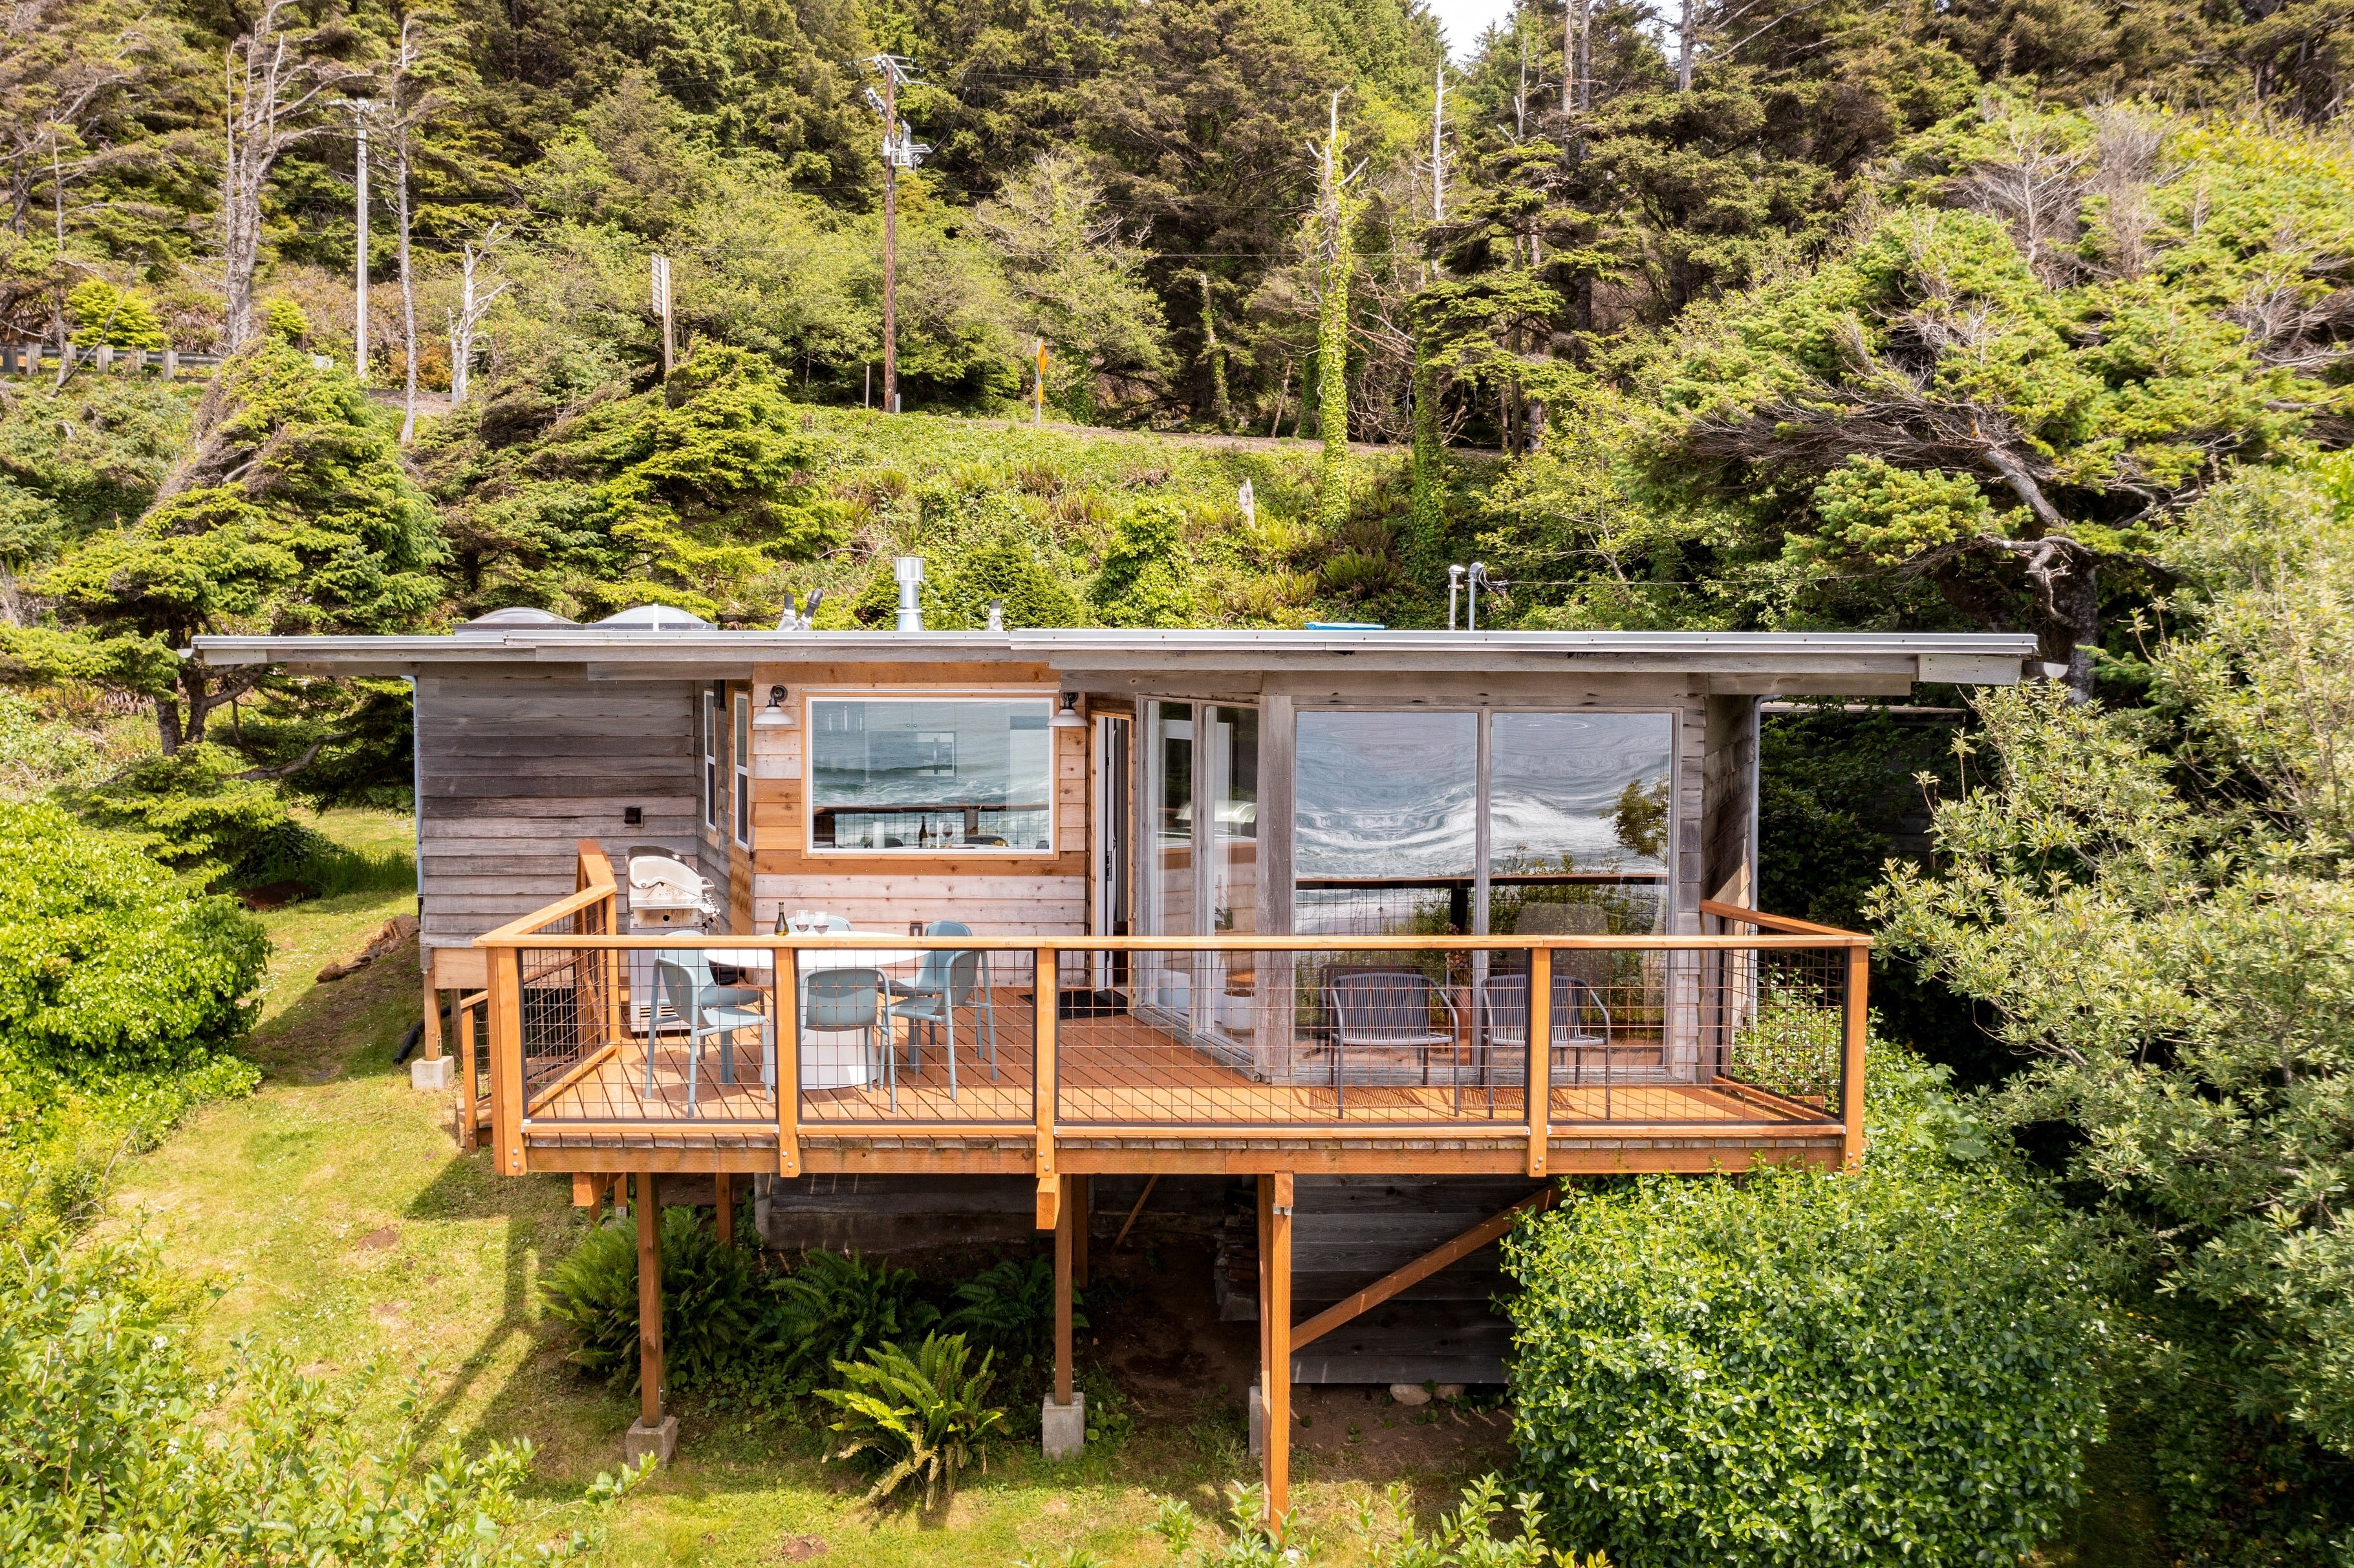 Perched on a hillside where the forest meets the sea.